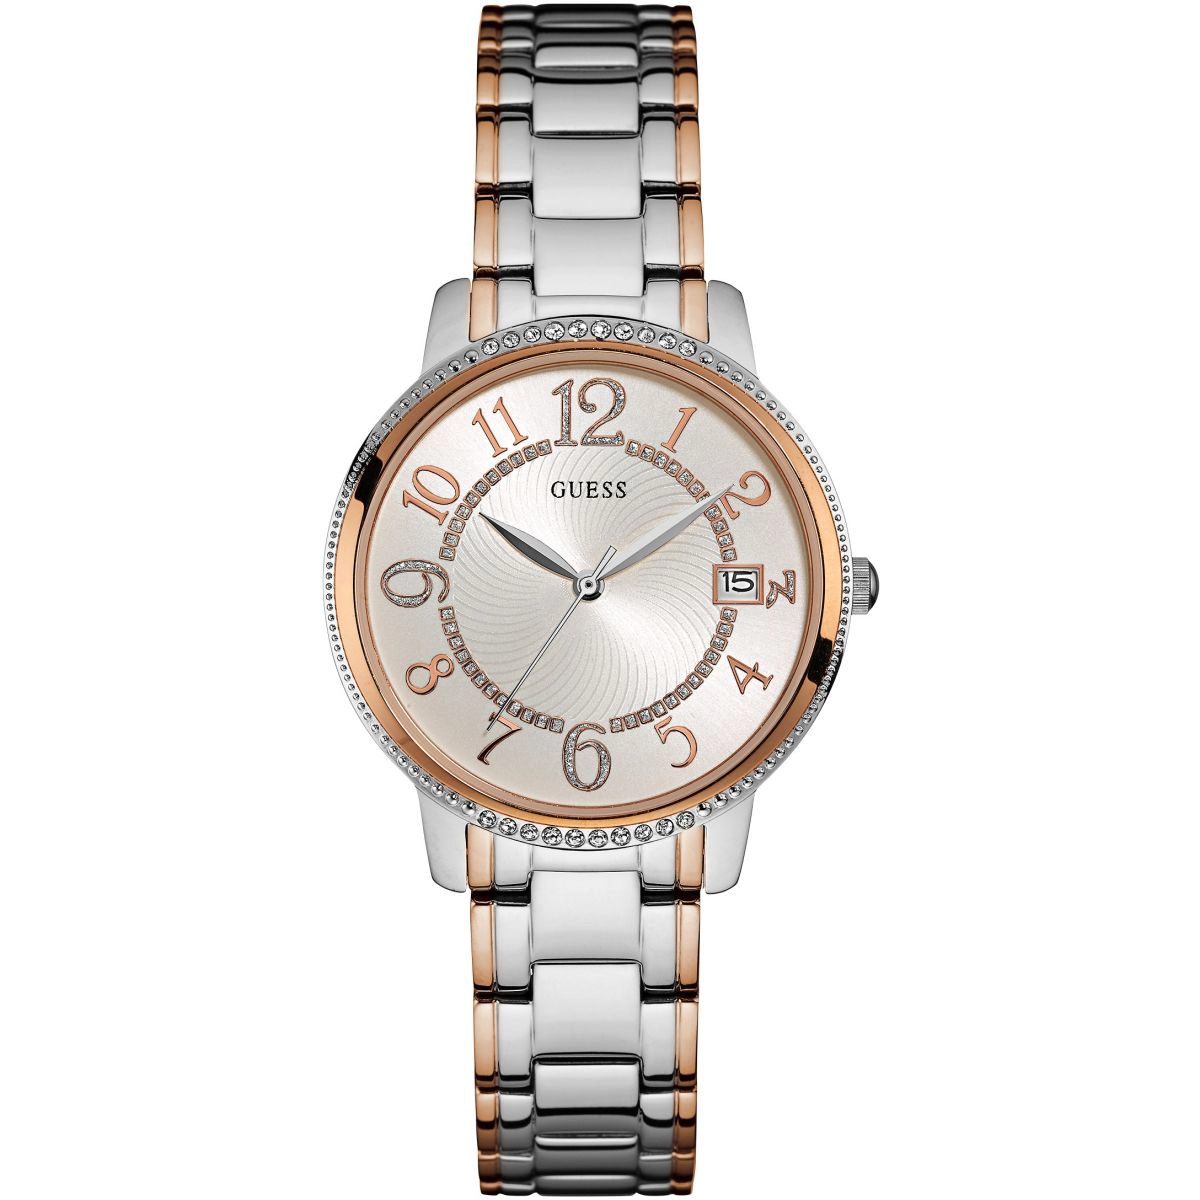 GUESS WATCH WOMEN ANALOG STAINLESS STEEL W0929L3